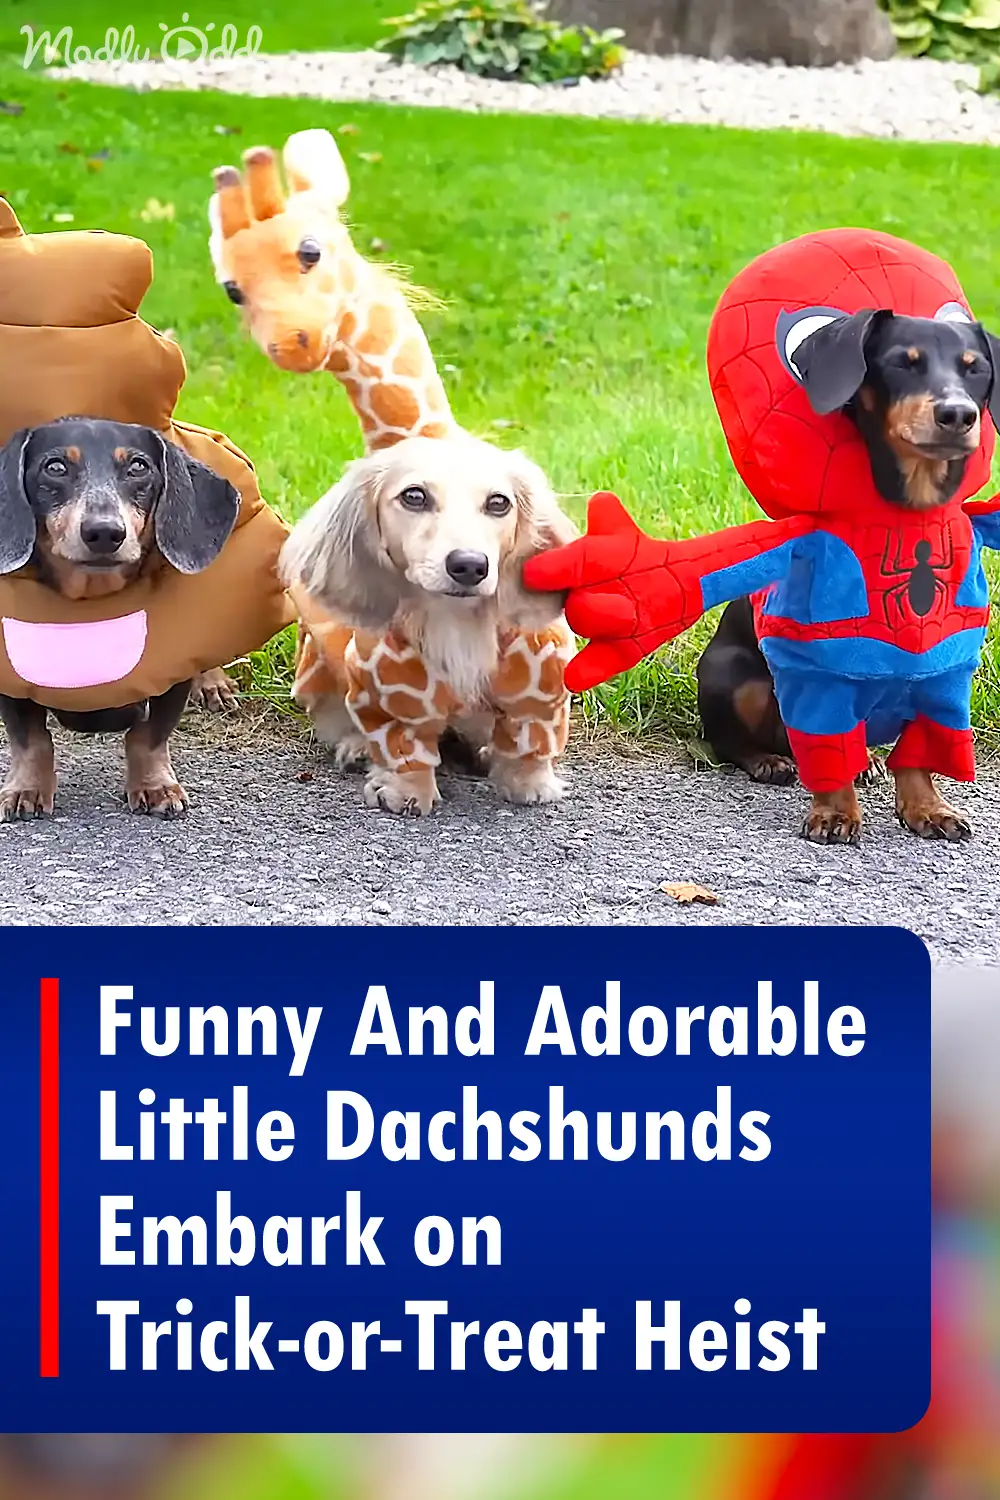 Funny And Adorable Little Dachshunds Embark on Trick-or-Treat Heist